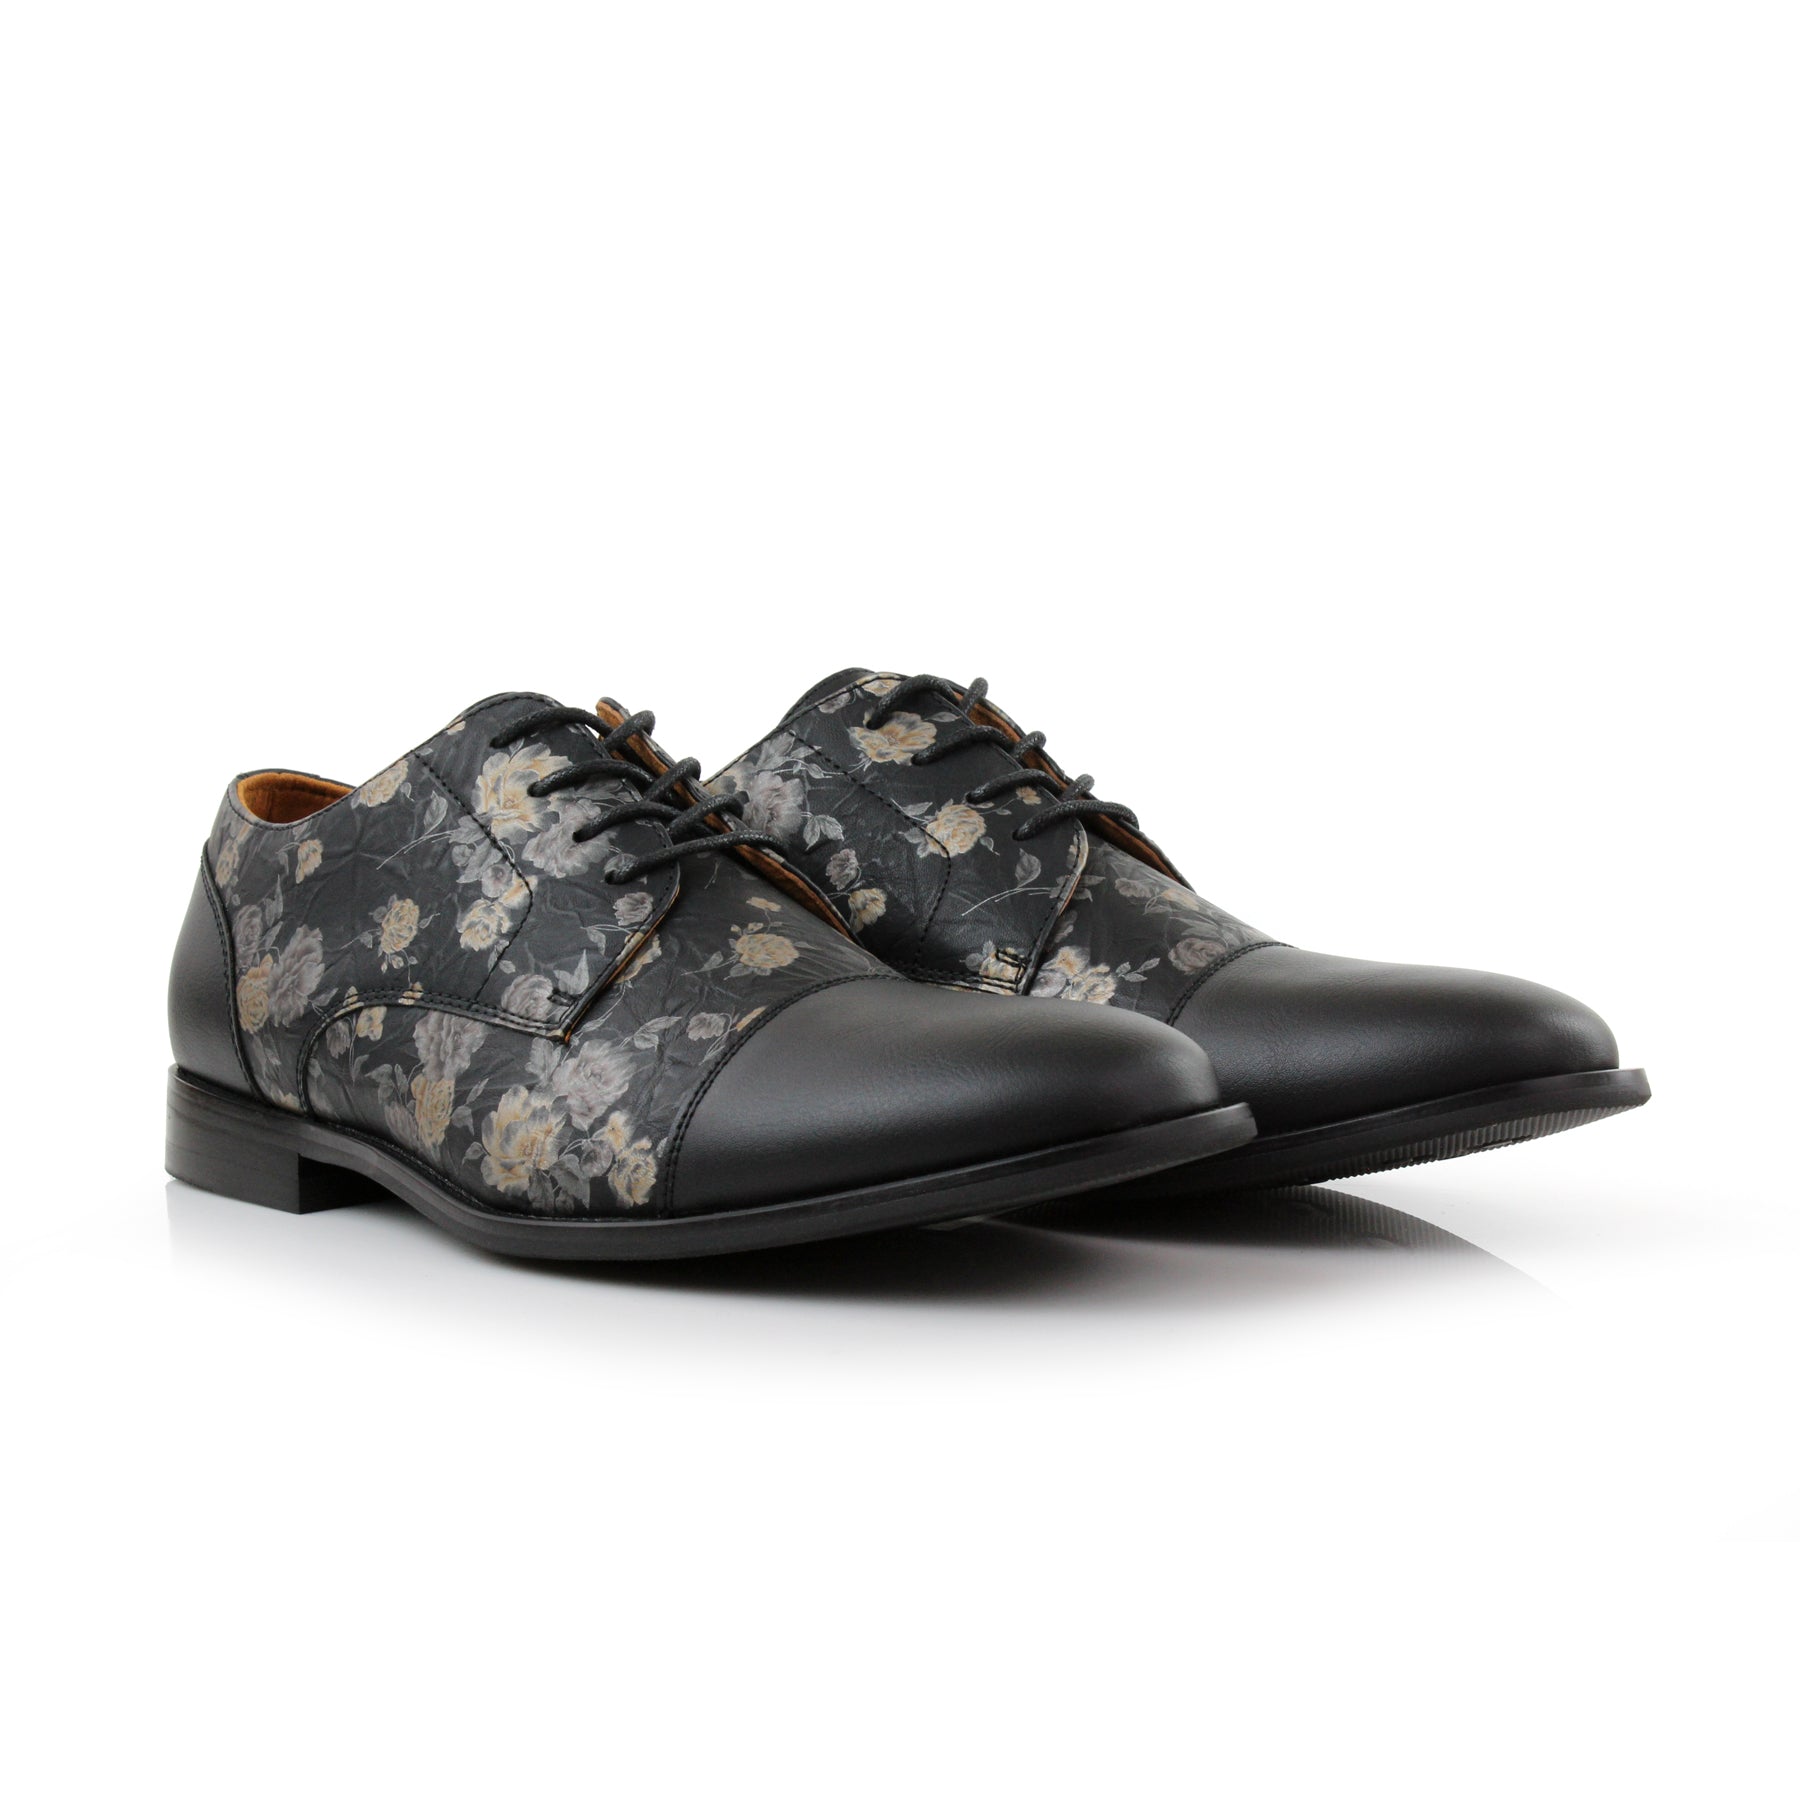 Floral Cap-Toe Derby Shoes | Berkley by Ferro Aldo | Conal Footwear | Paired Angle View